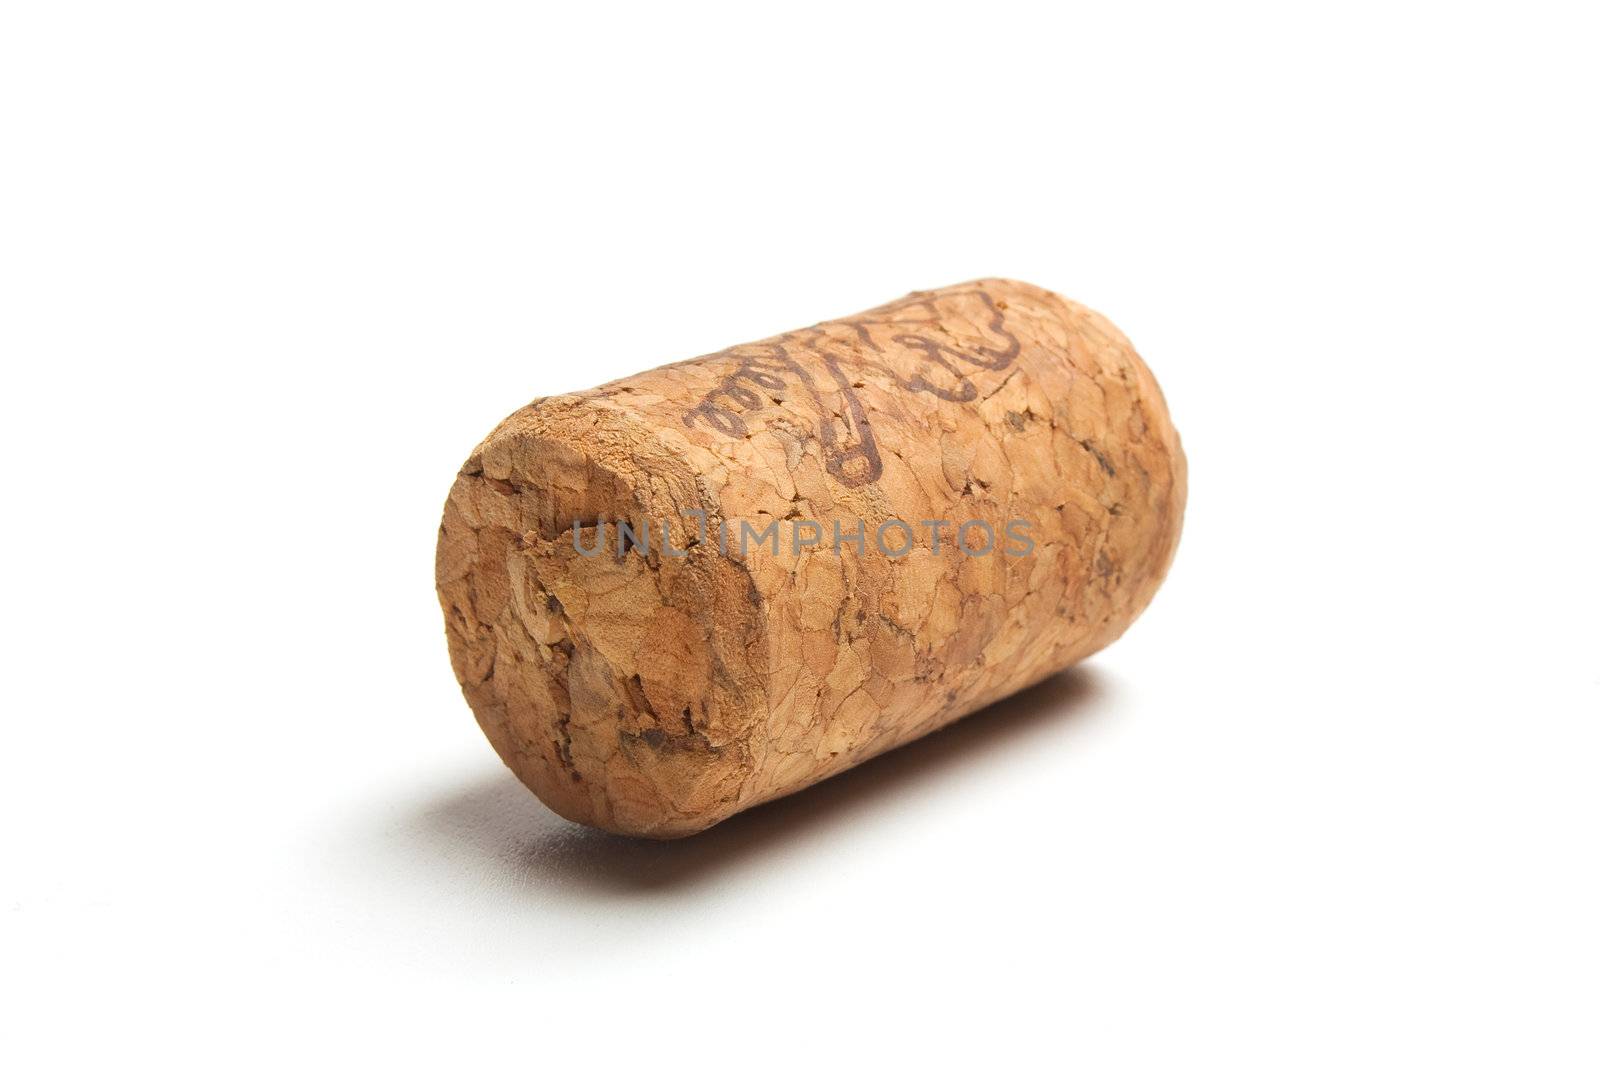 cork from the bottle isolated on white background